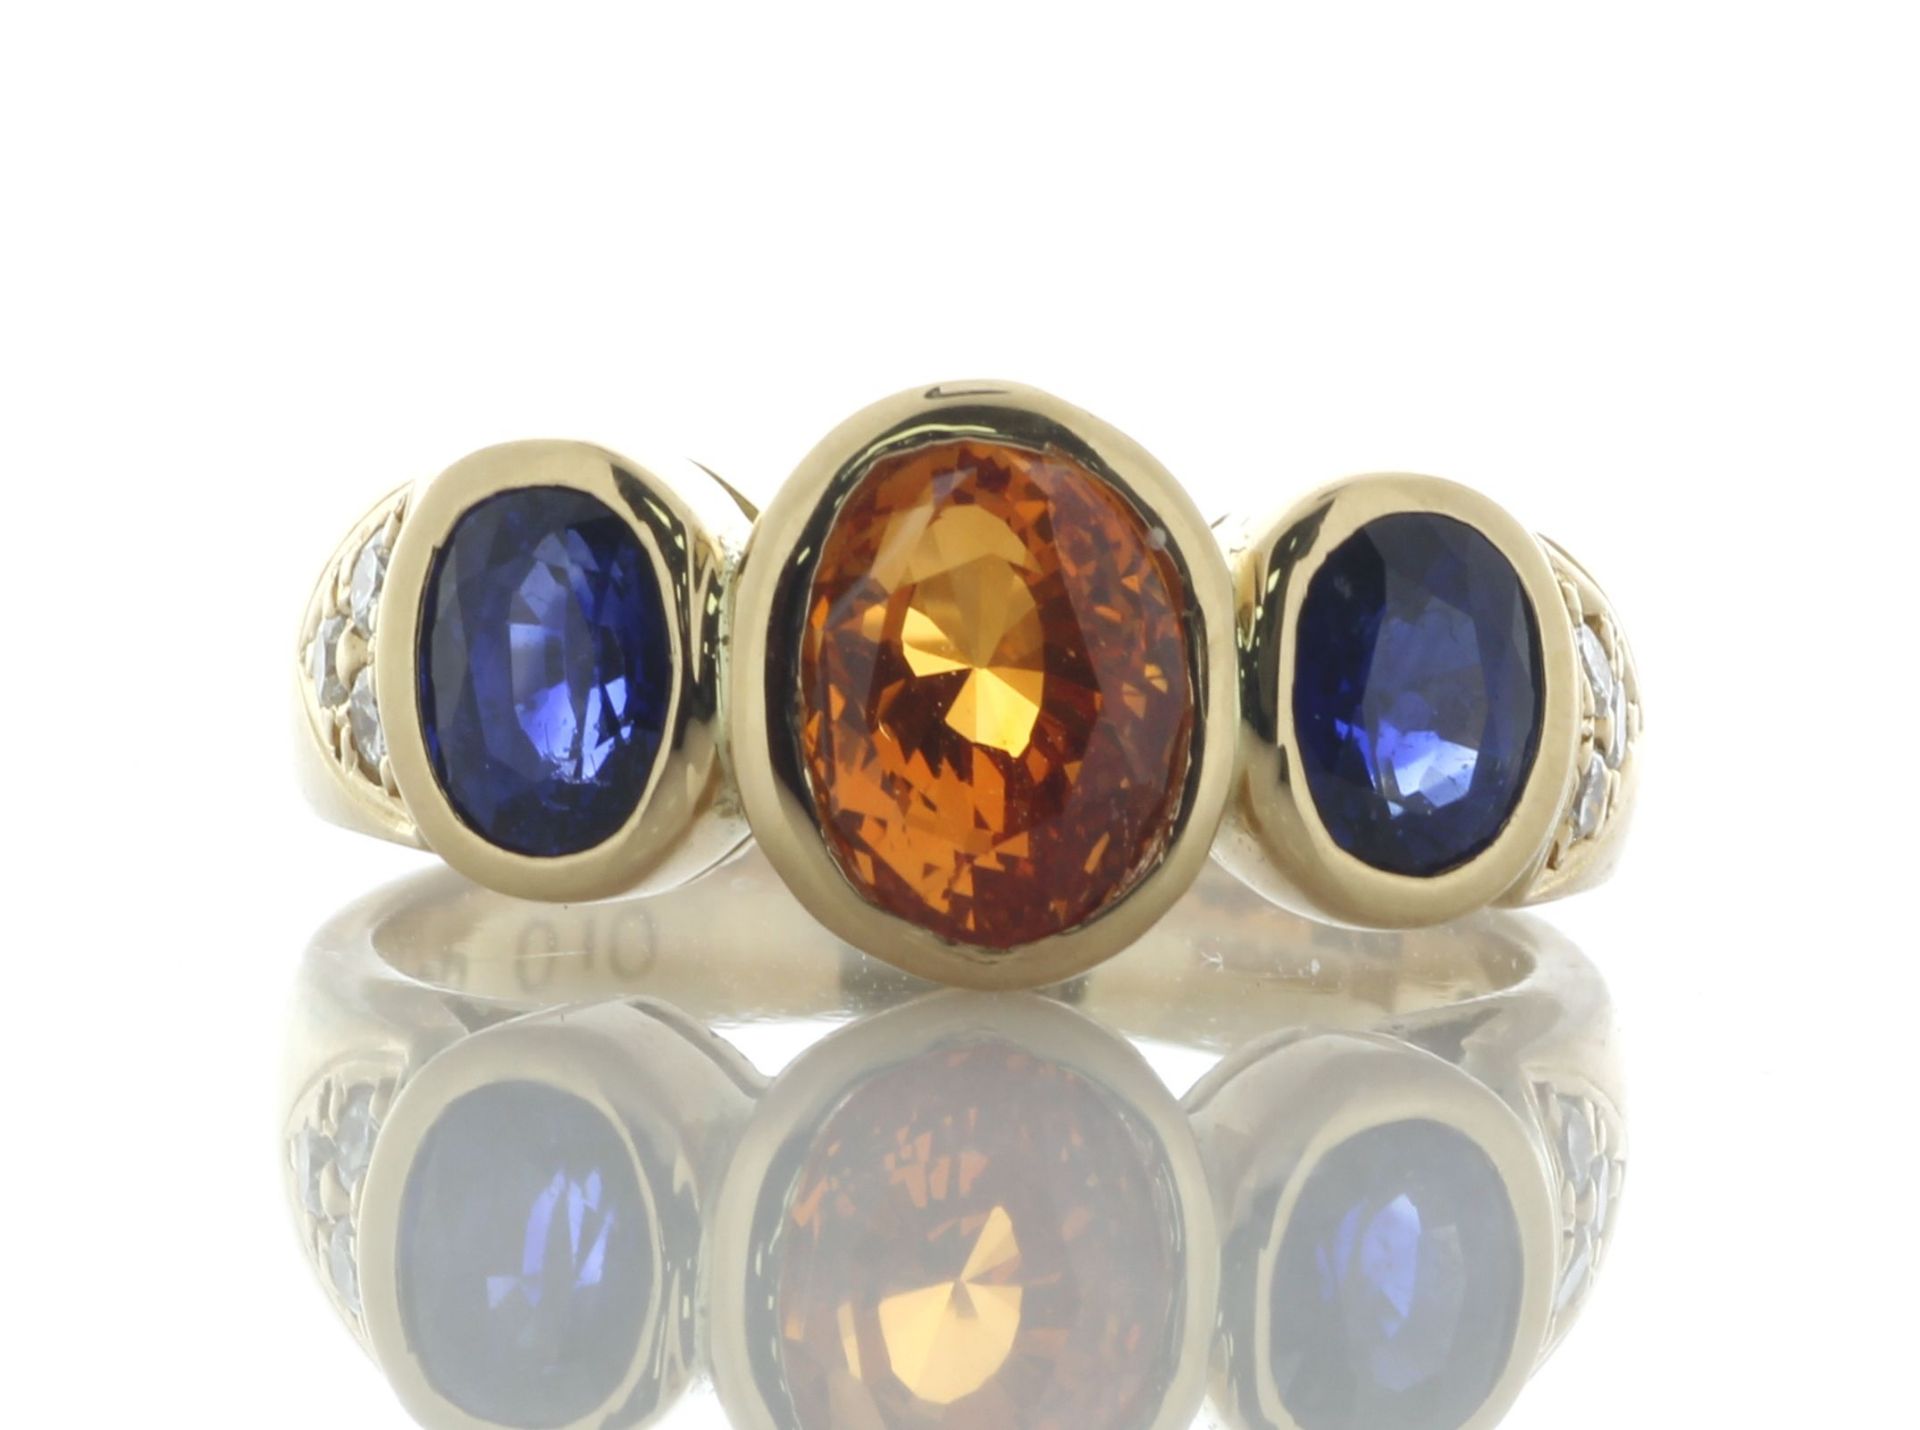 18ct Yellow Gold Three Stone Oval Cut GIA Orange Sapphire Center Ring (S2.31) 0.10 Carats - Valued